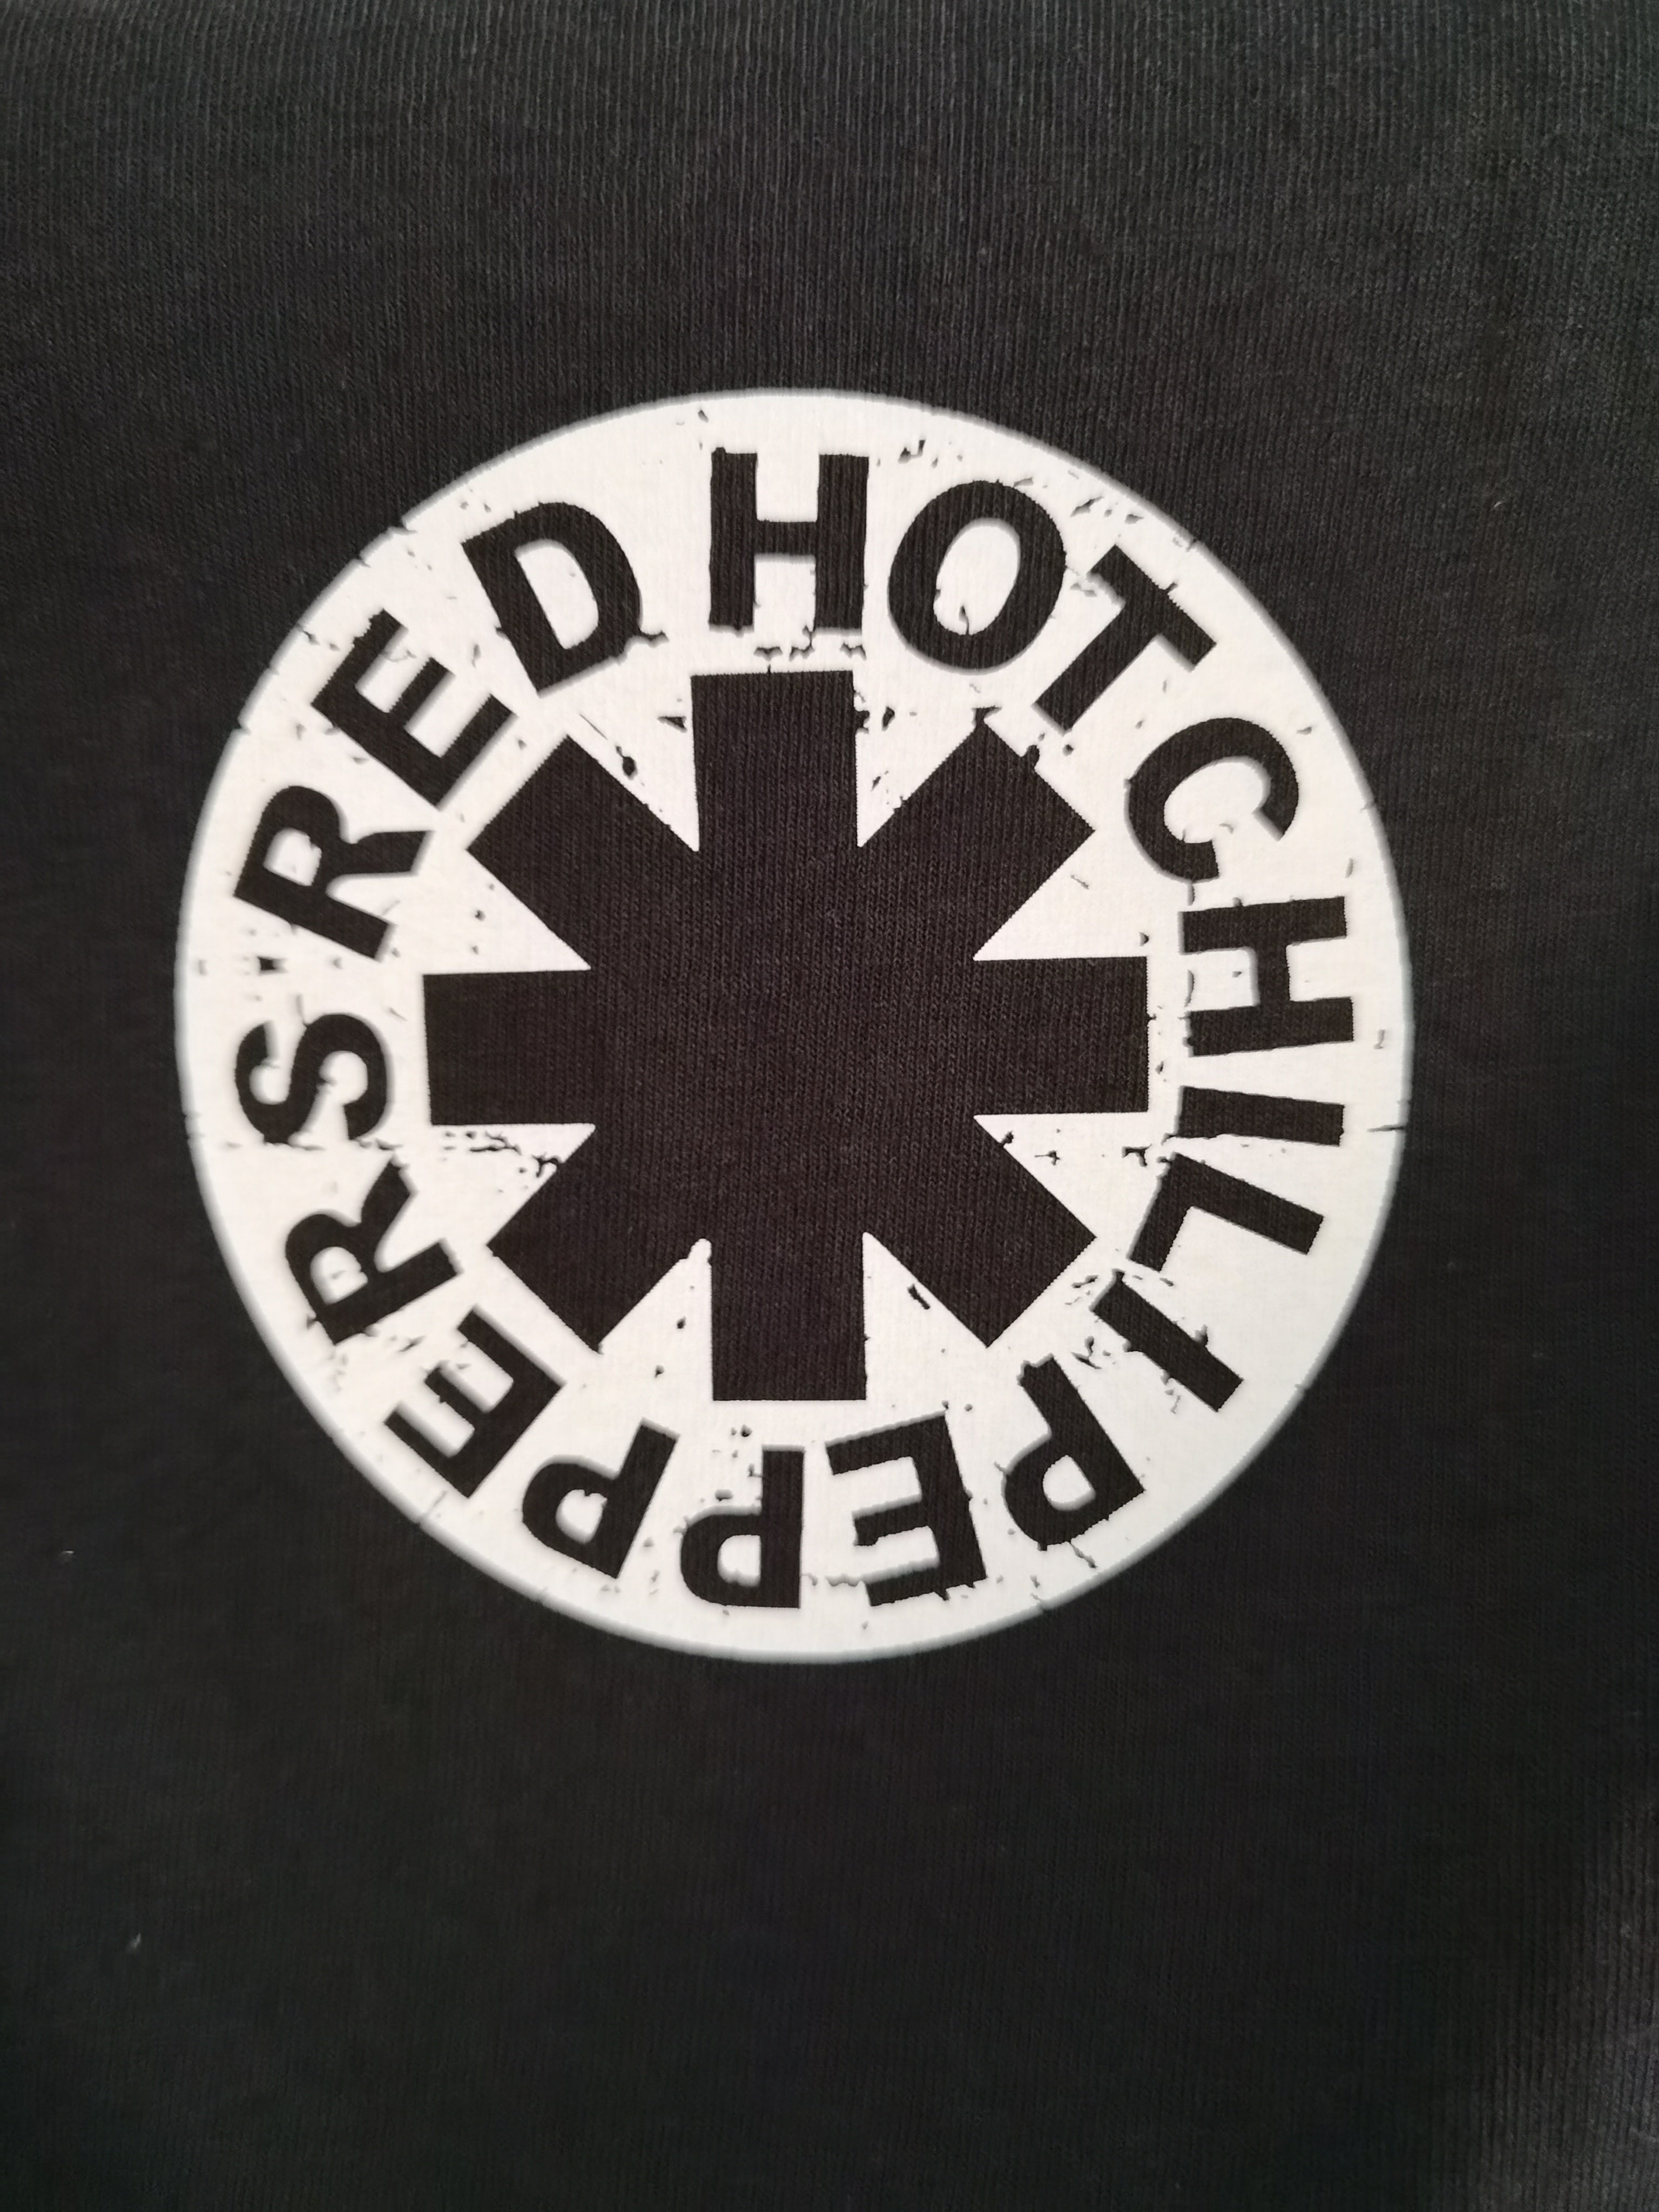 RED HOT CHILI PEPPERS MAJICA 5